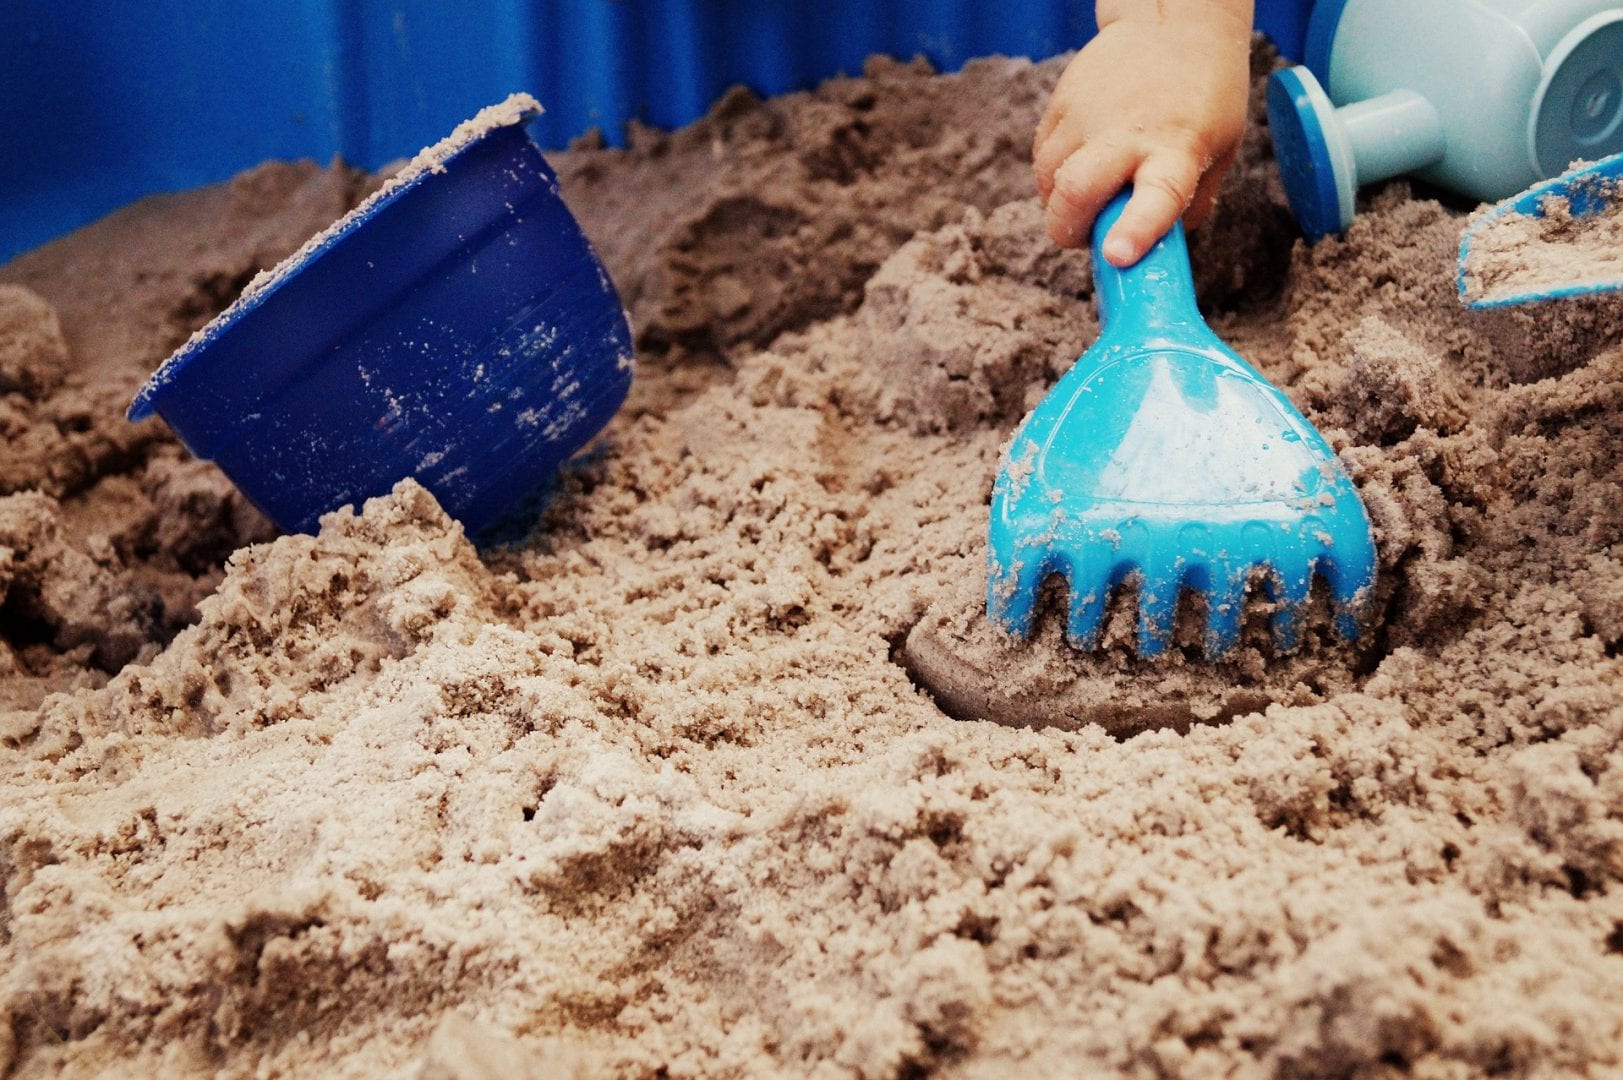 a kids hand playing with a rake and bucket in sand